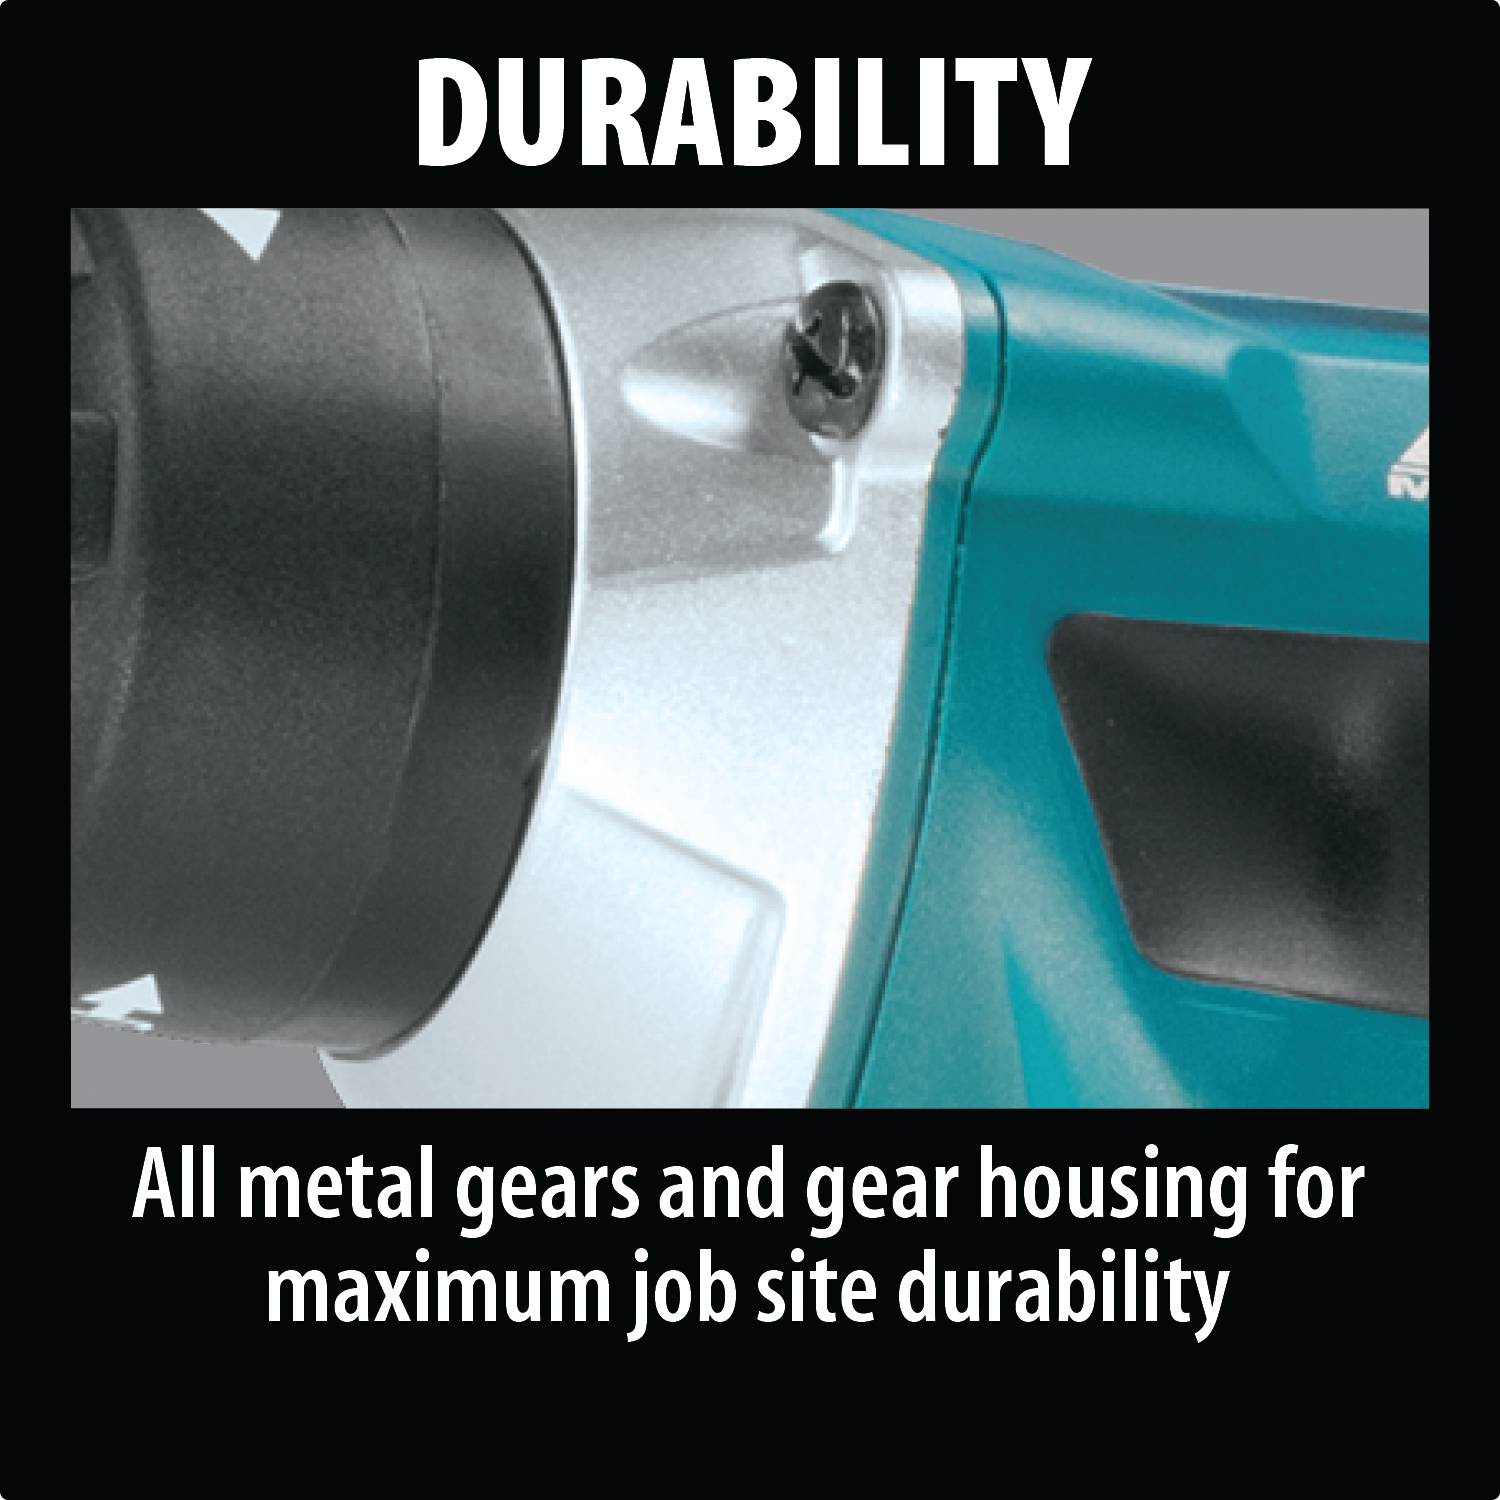 Makita XSF03Z 18V LXT Lithium-Ion Brushless Cordless Drywall Screwdriver 4,000 RPM (Tool Only)